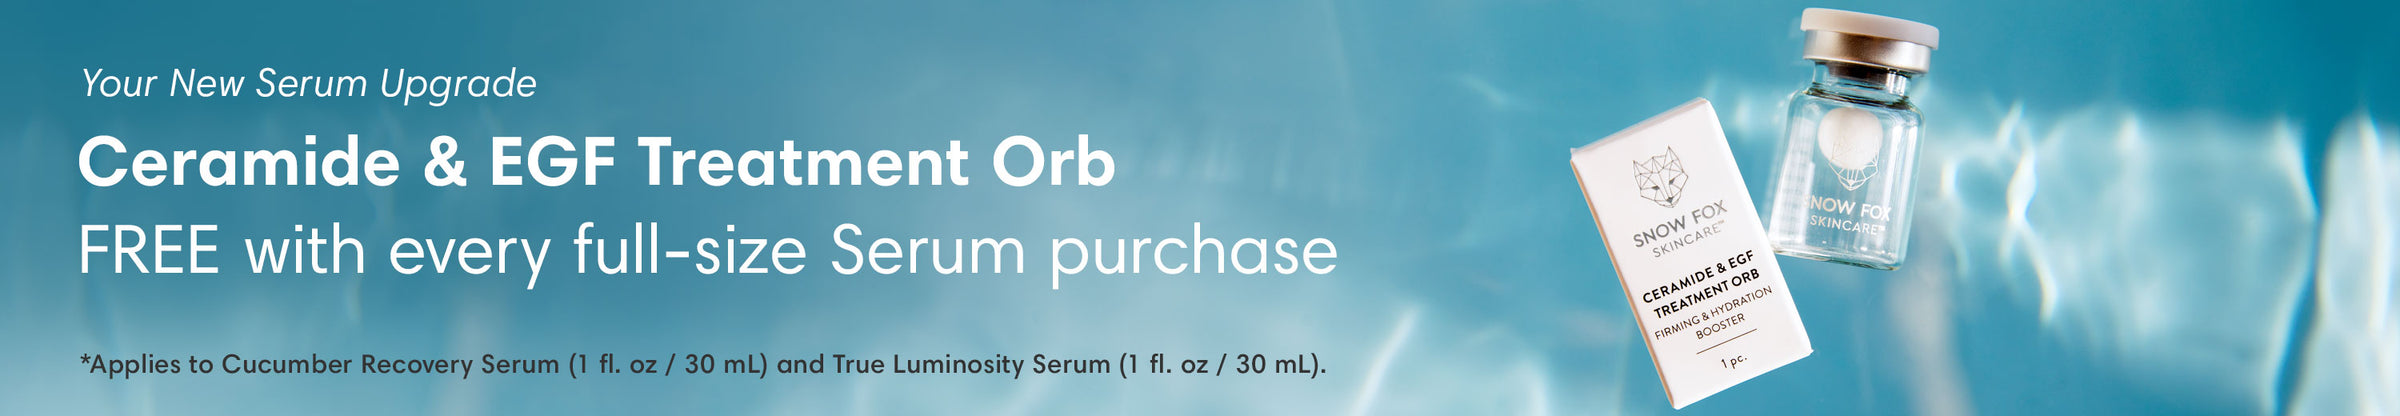 FREE Ceramide & EGF Treatment Orb with all full-size Serum purchases.